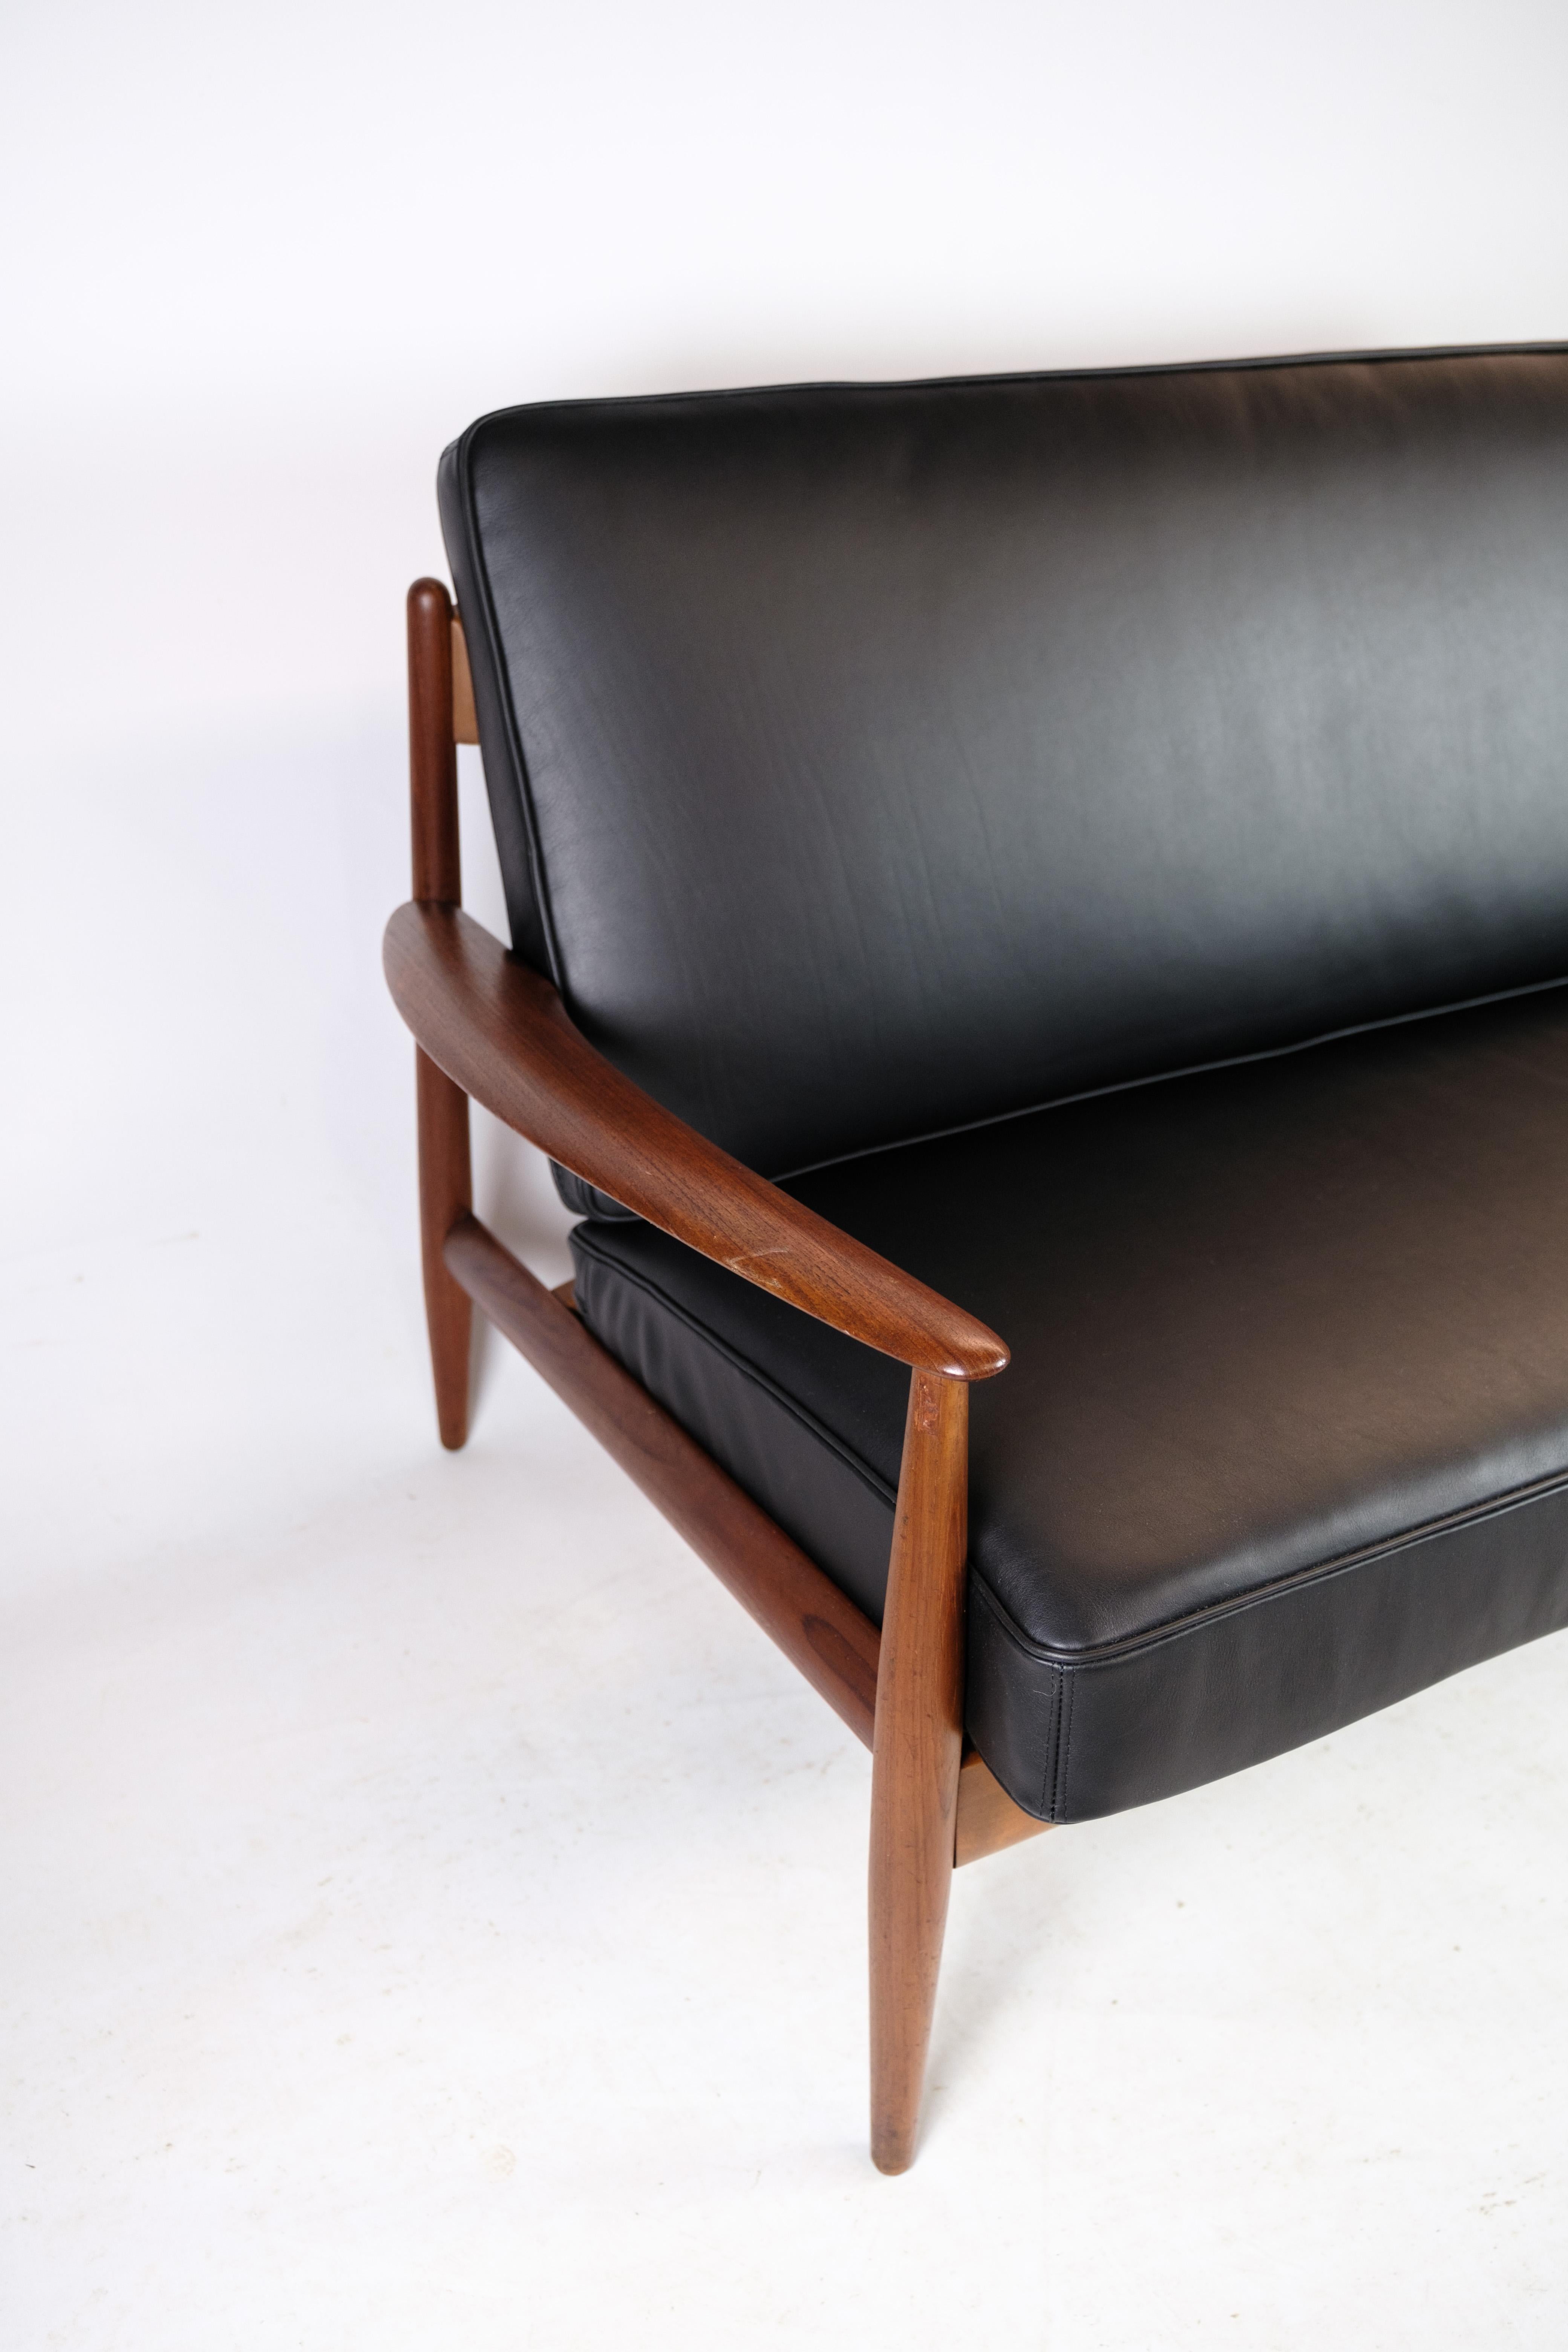 2 Seater Sofa Model 118 Made With a Teak Frame By Grete Jalk From 1960s In Excellent Condition For Sale In Lejre, DK